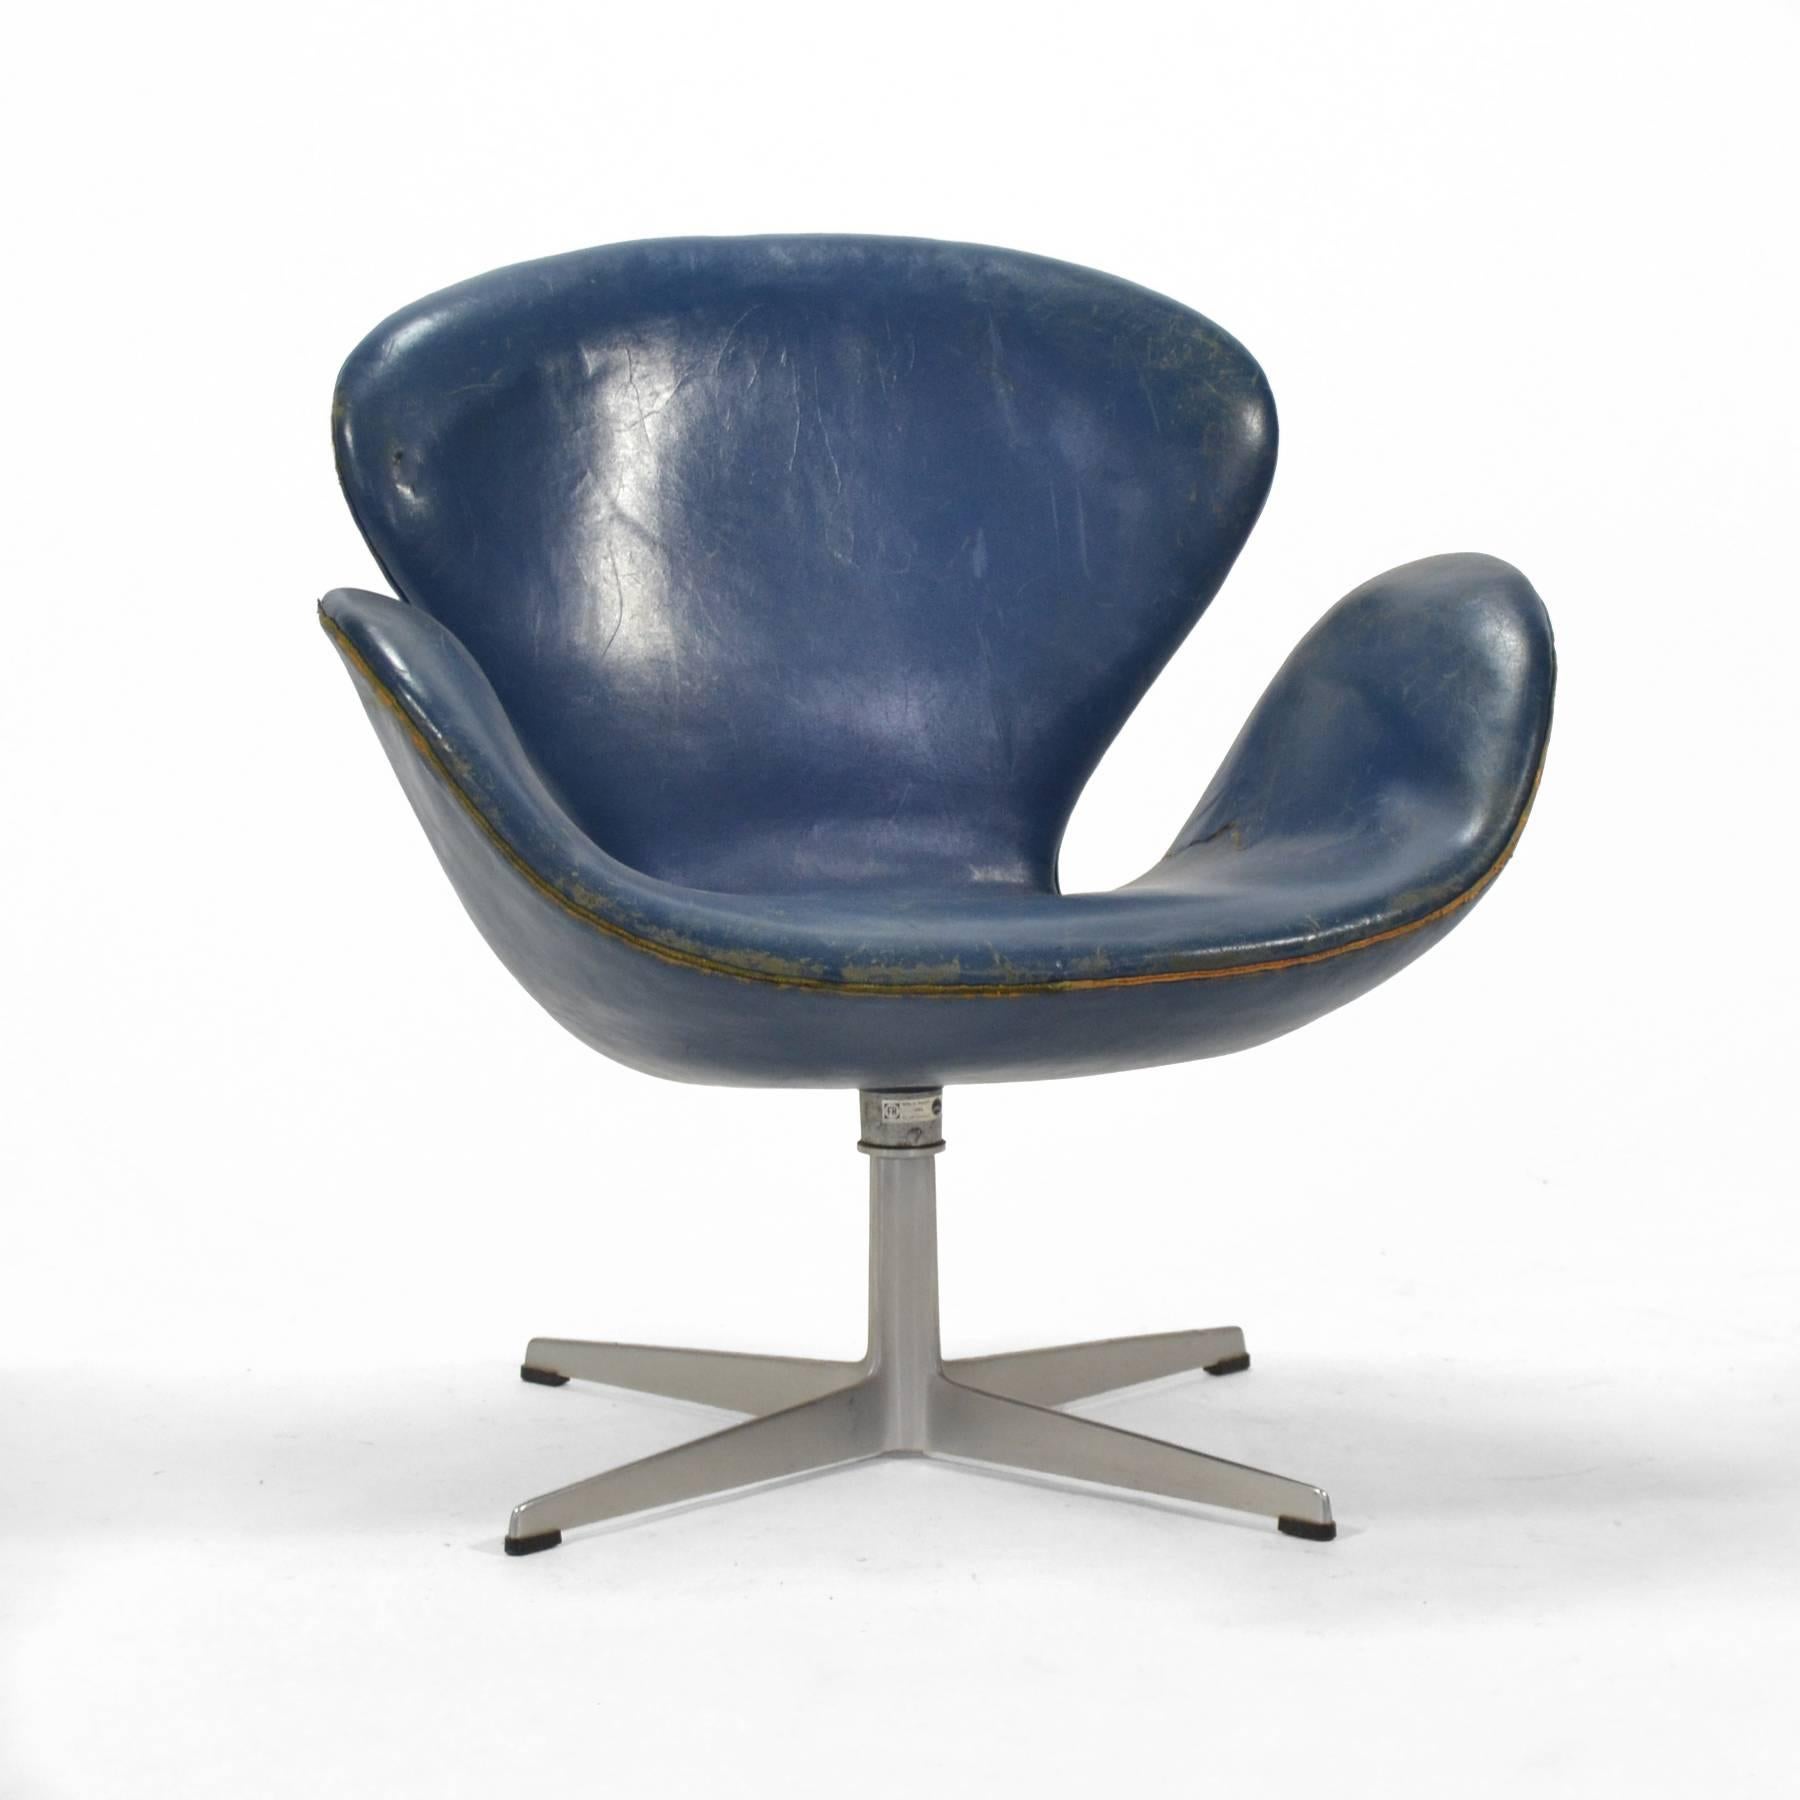 This early Jacobsen swan chair is for the collector who appreciates the original blue leather and the wear of a lifetime of use.
The heavily patinated upholstery has lots of character and a couple of rips which we are having stabilized by a